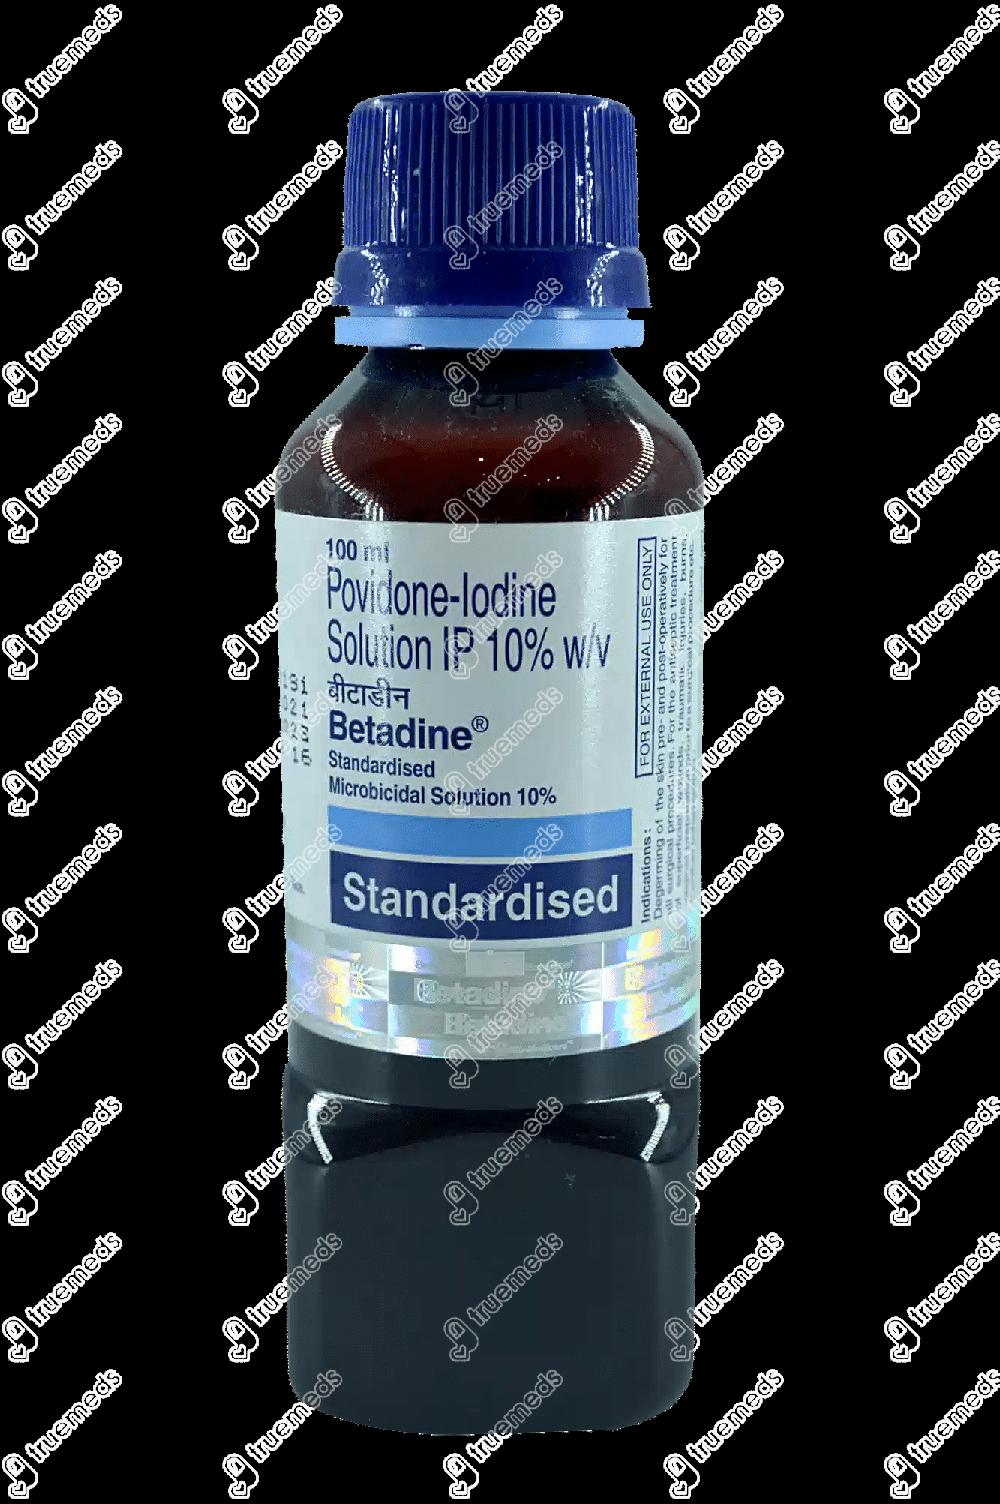 A brown glass bottle of Betadine, a povidone-iodine solution used as a topical antiseptic.